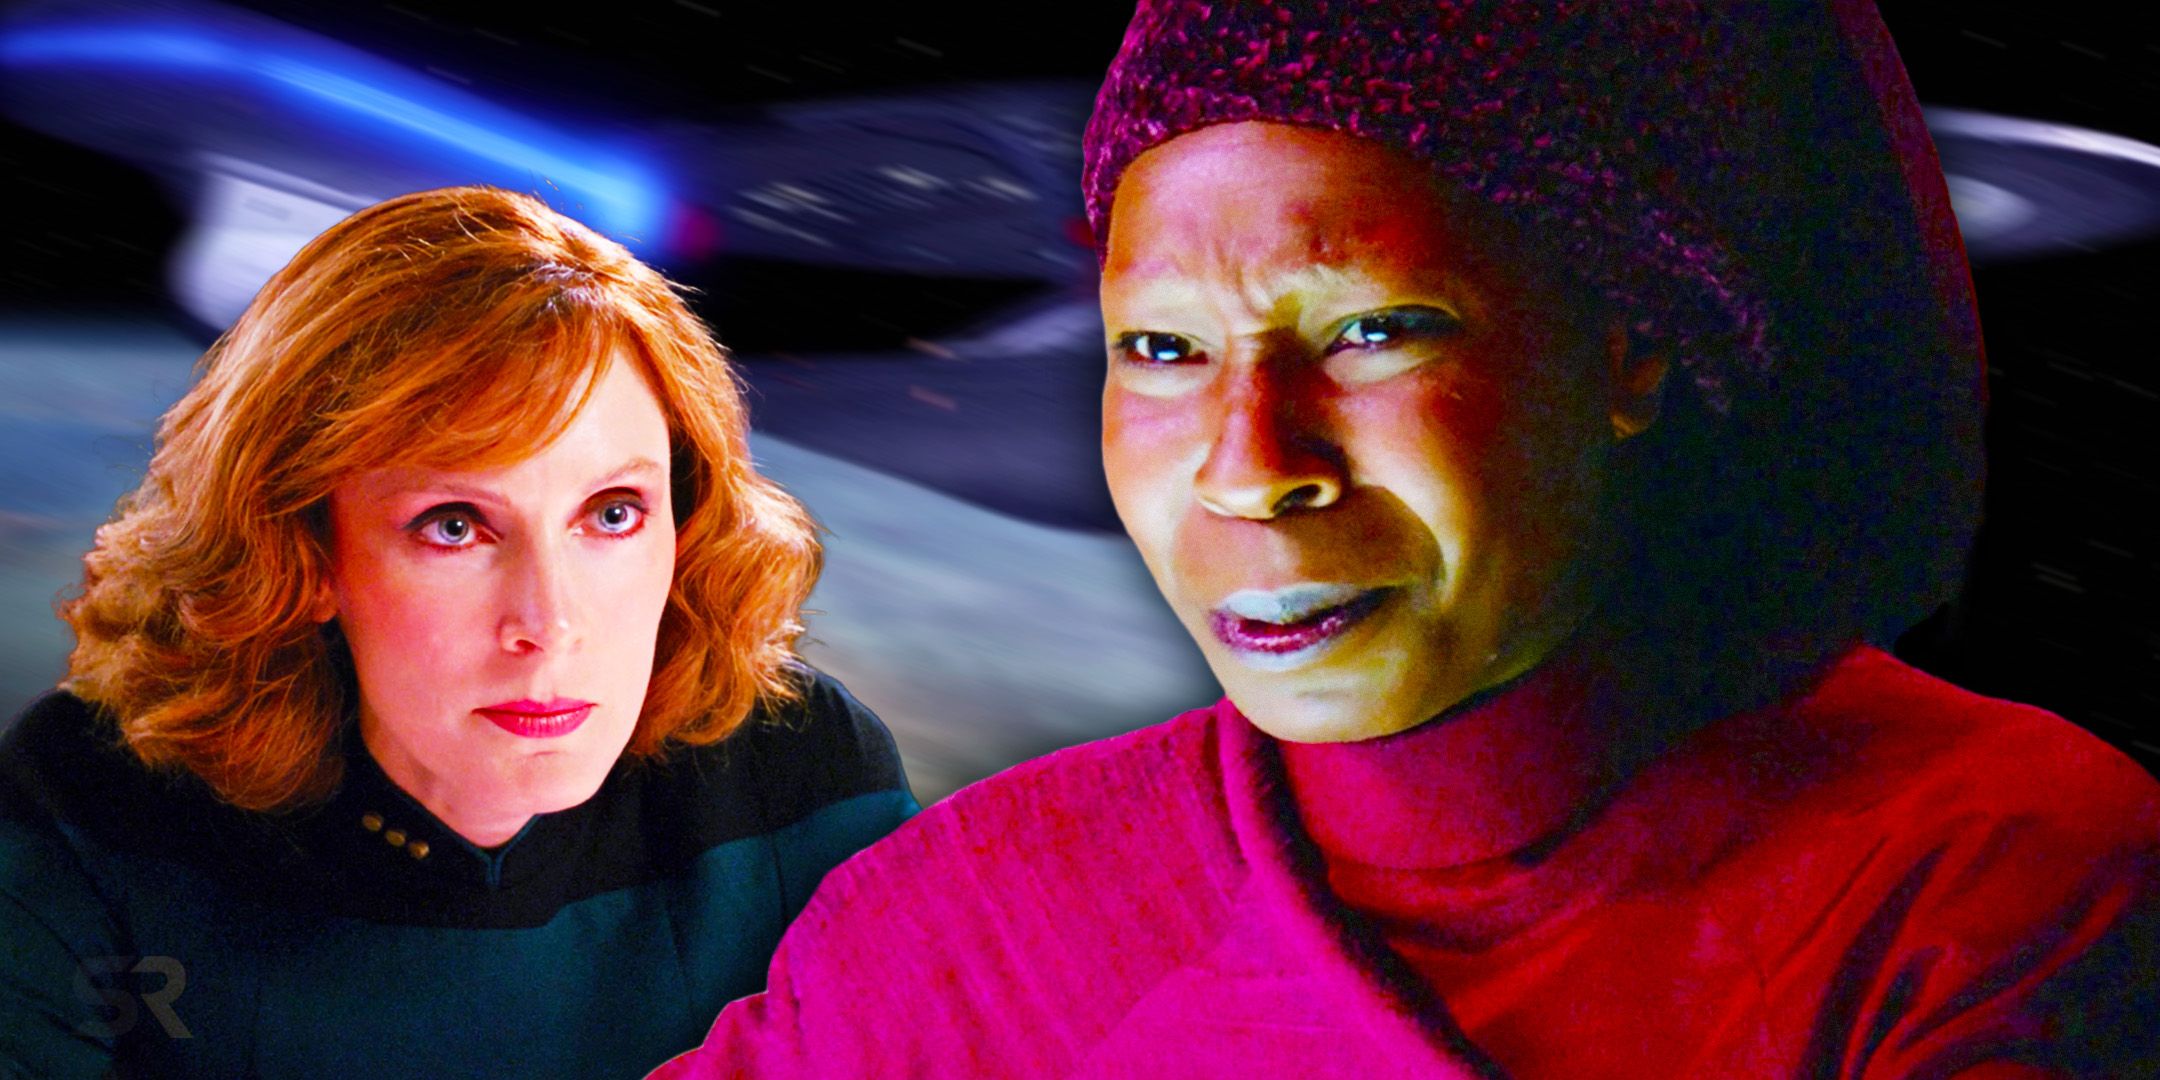 Dr. Crusher and Guinan from Star Trek TNG